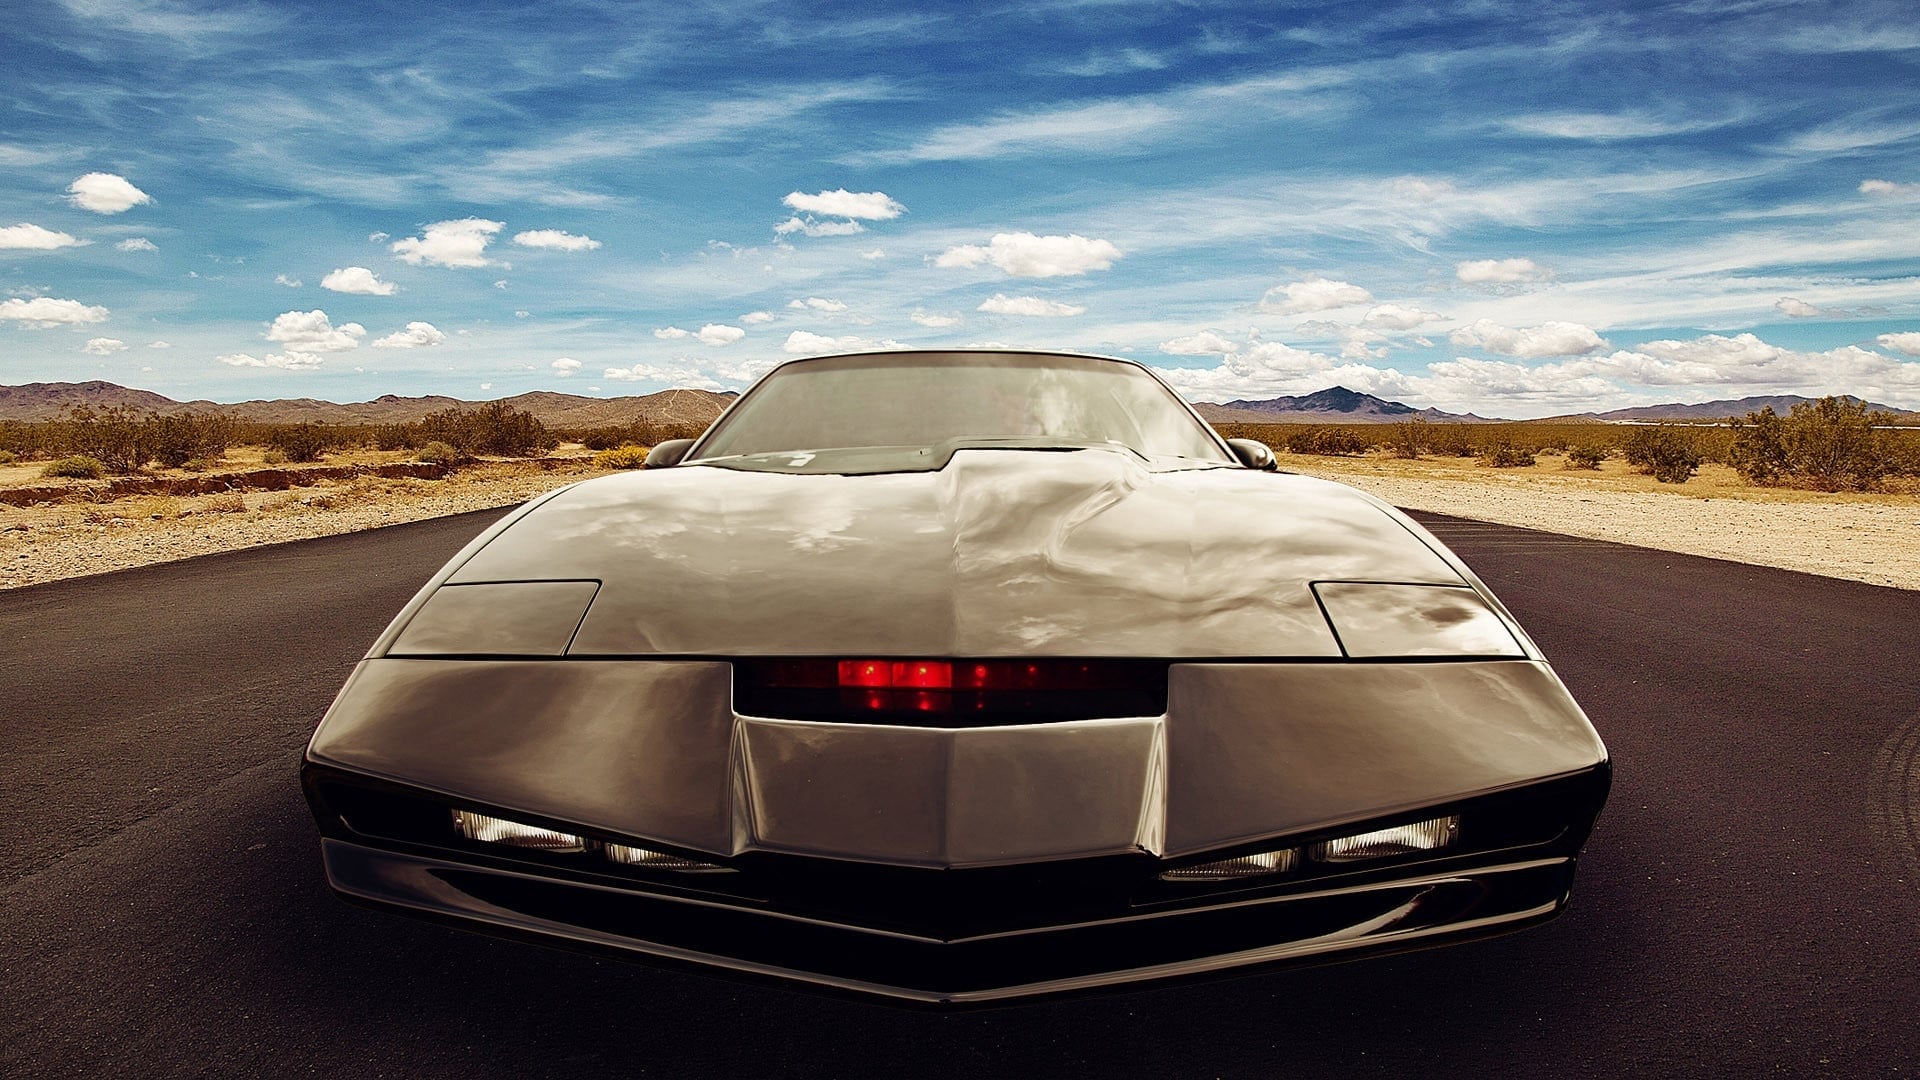 Knight Rider Sports Car TV Series Car K I T T 1980s Road Front Angle View 1920x1080